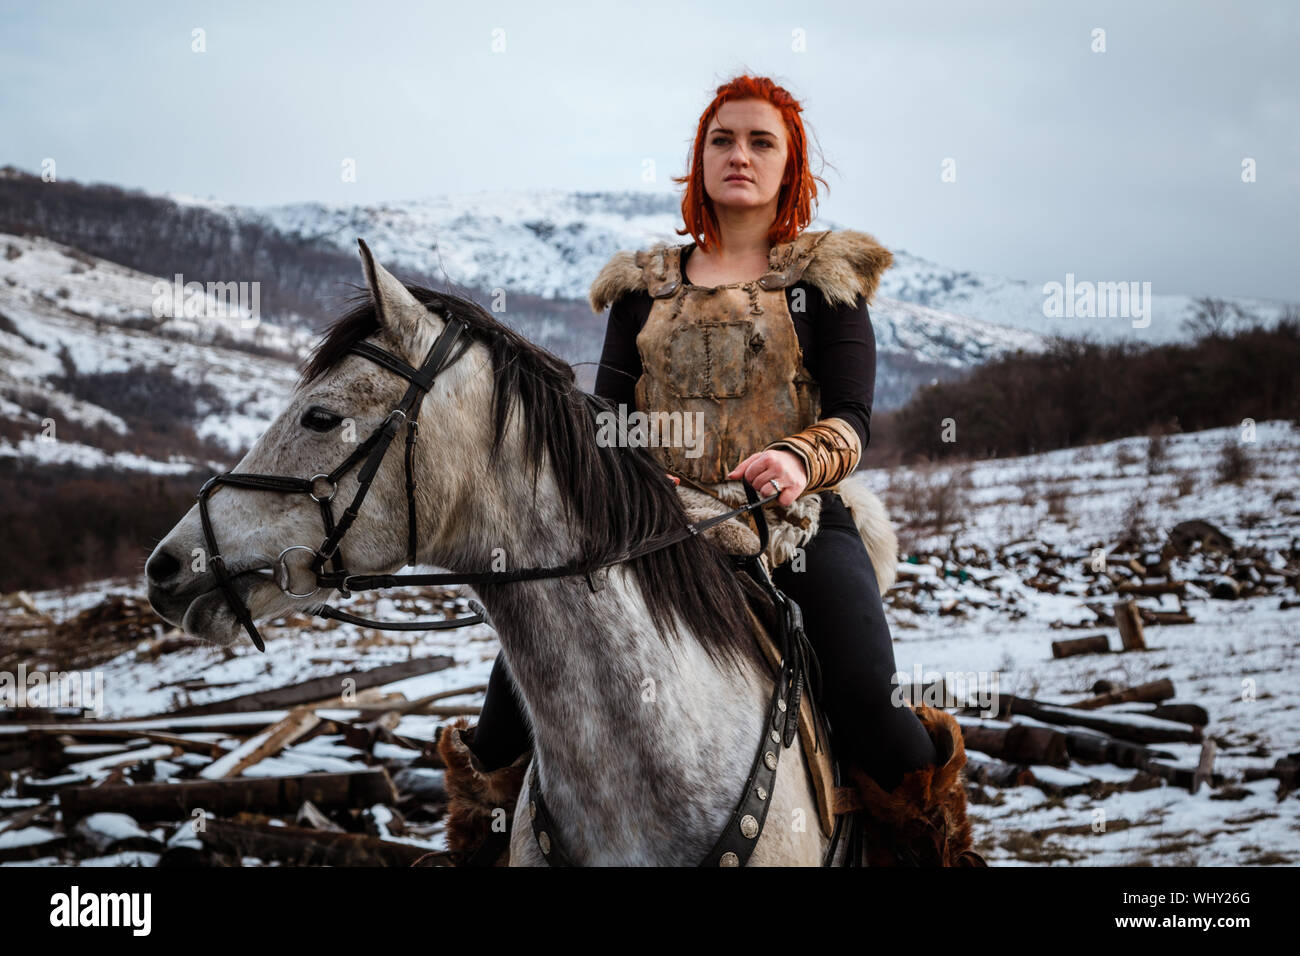 Beautiful girl on horse and with red hair in armor. Woman is a Viking. Fantasy Stock Photo